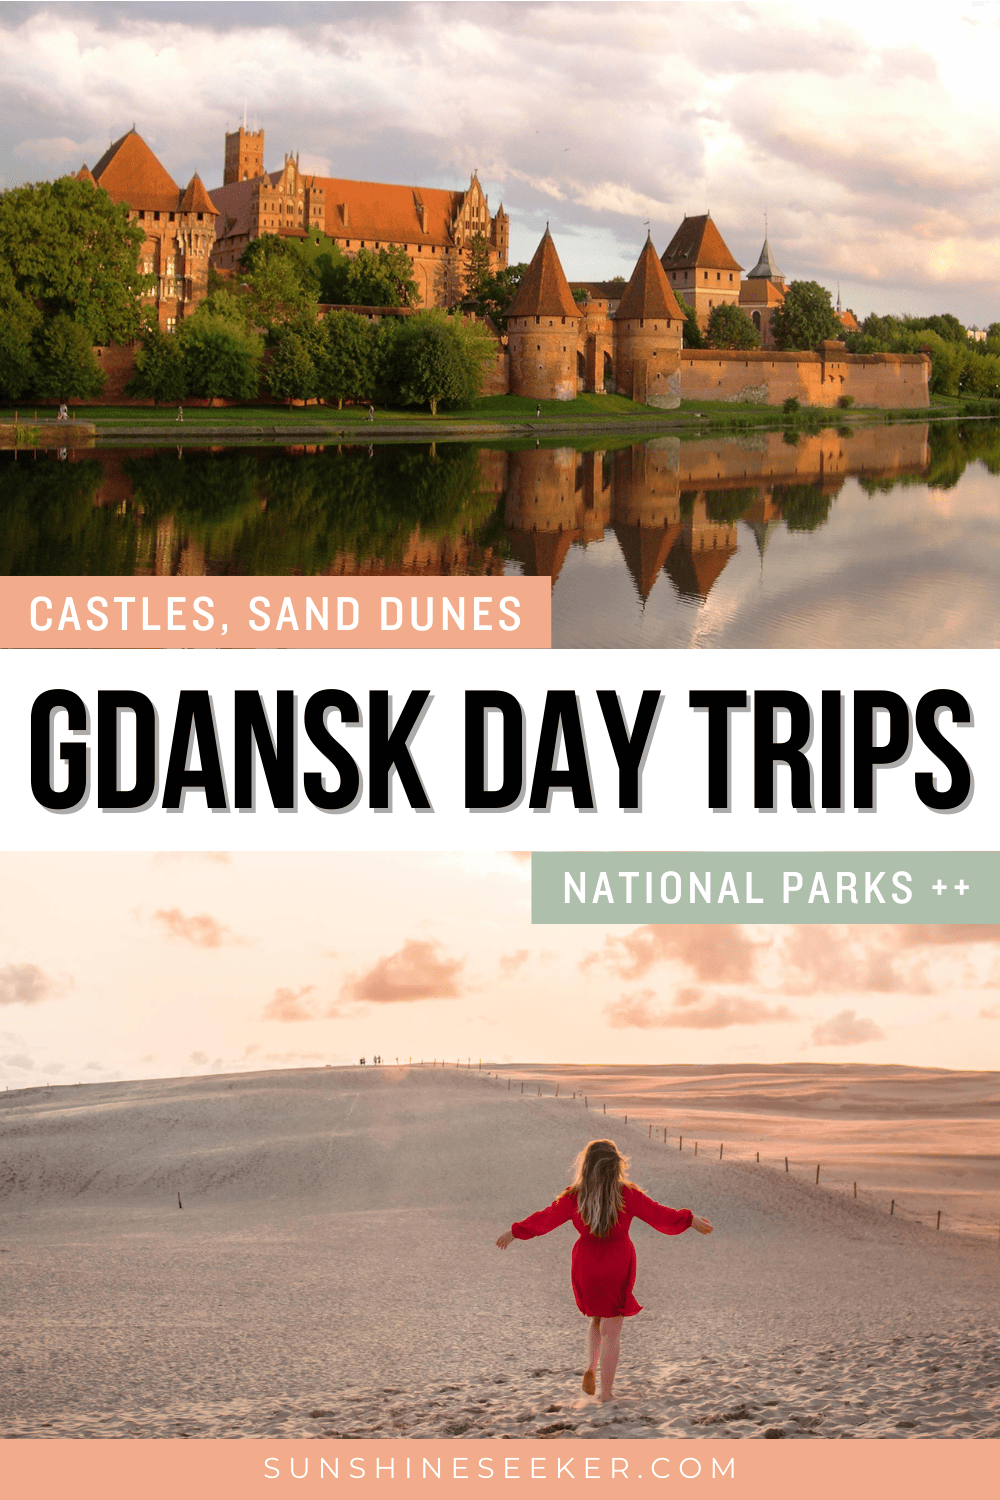 Discover all the best day trips from Gdansk, Poland. From medieval towns and historic castles to shifting sand dunes and miles of white sand beaches. This is why you need to visit northern Poland!